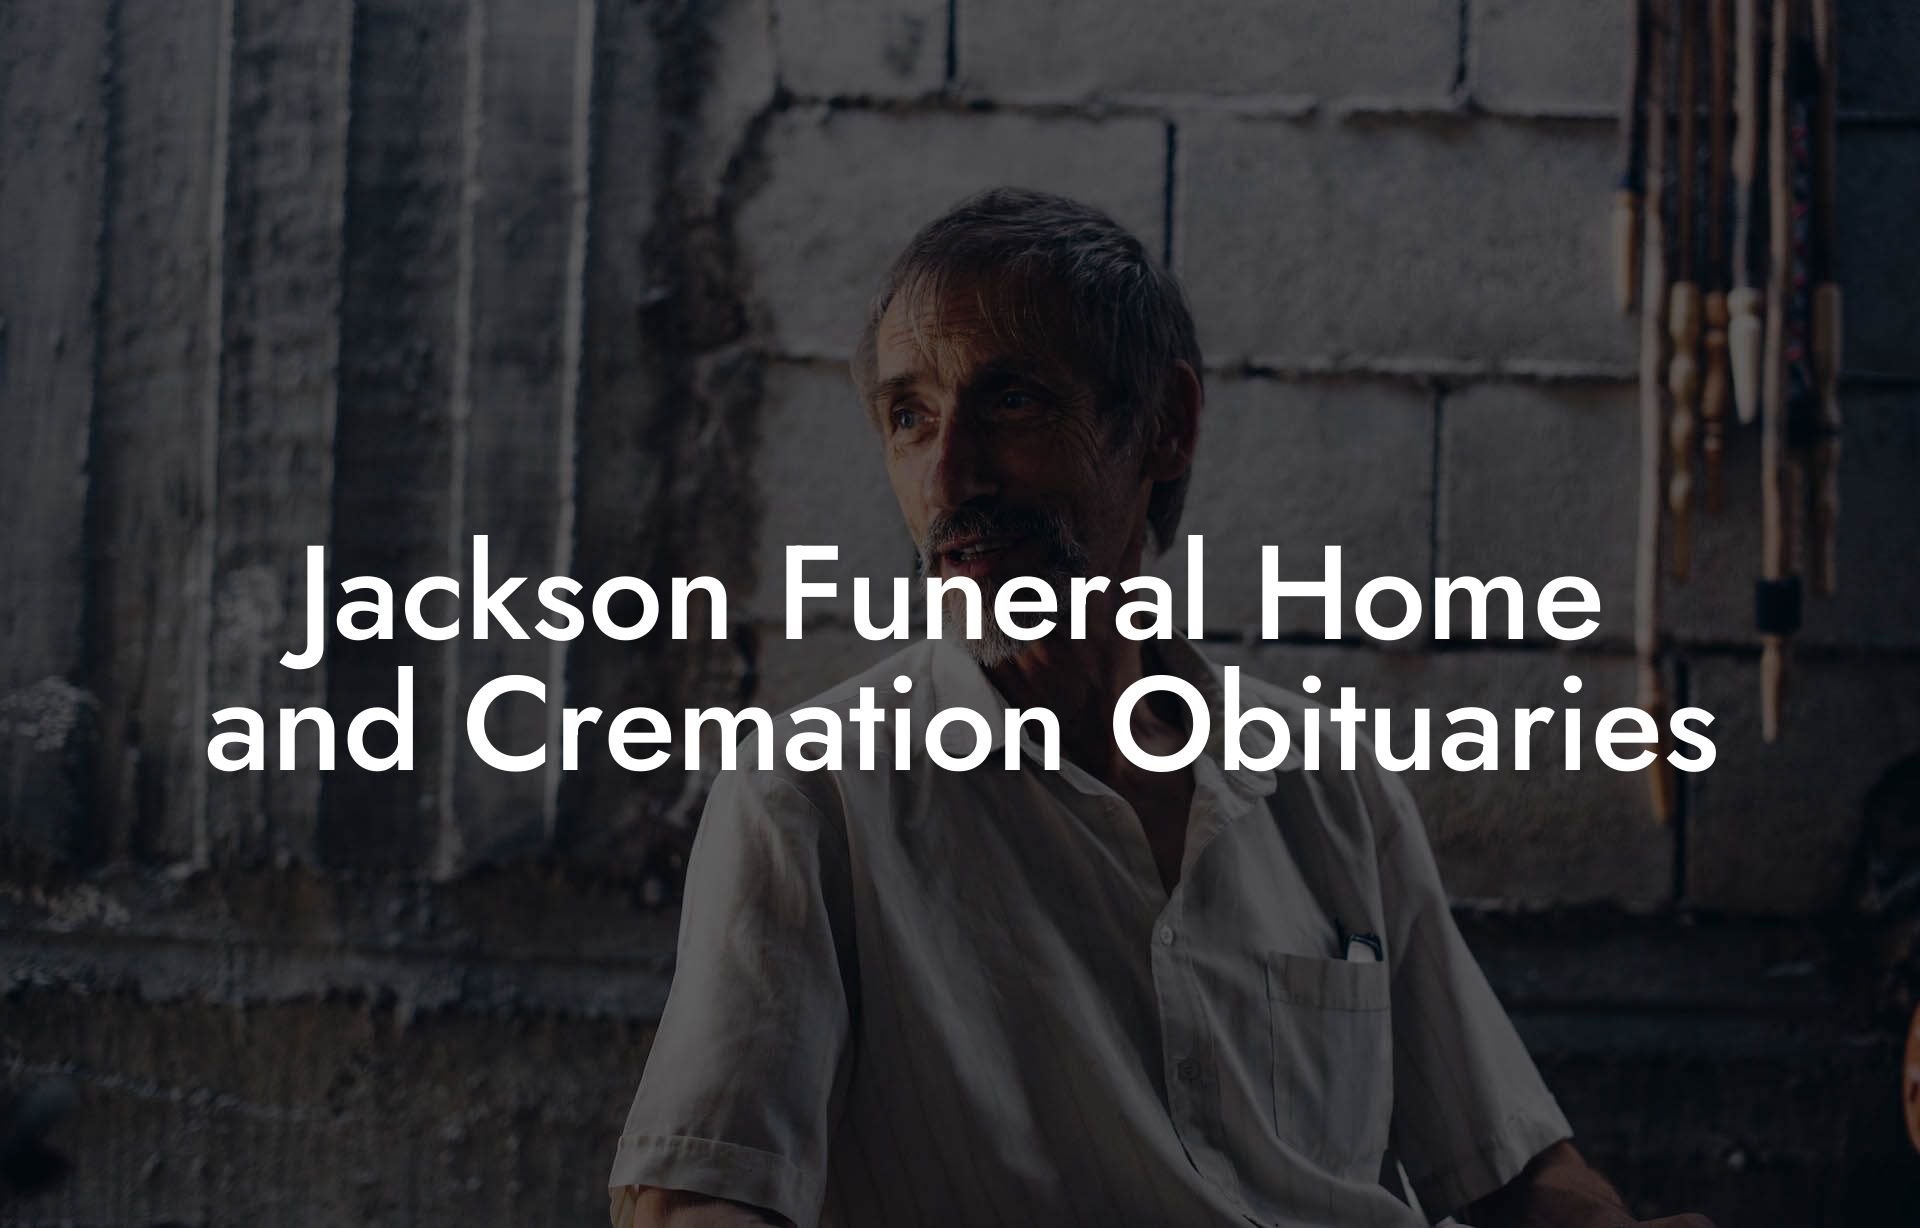 Jackson Funeral Home and Cremation Obituaries